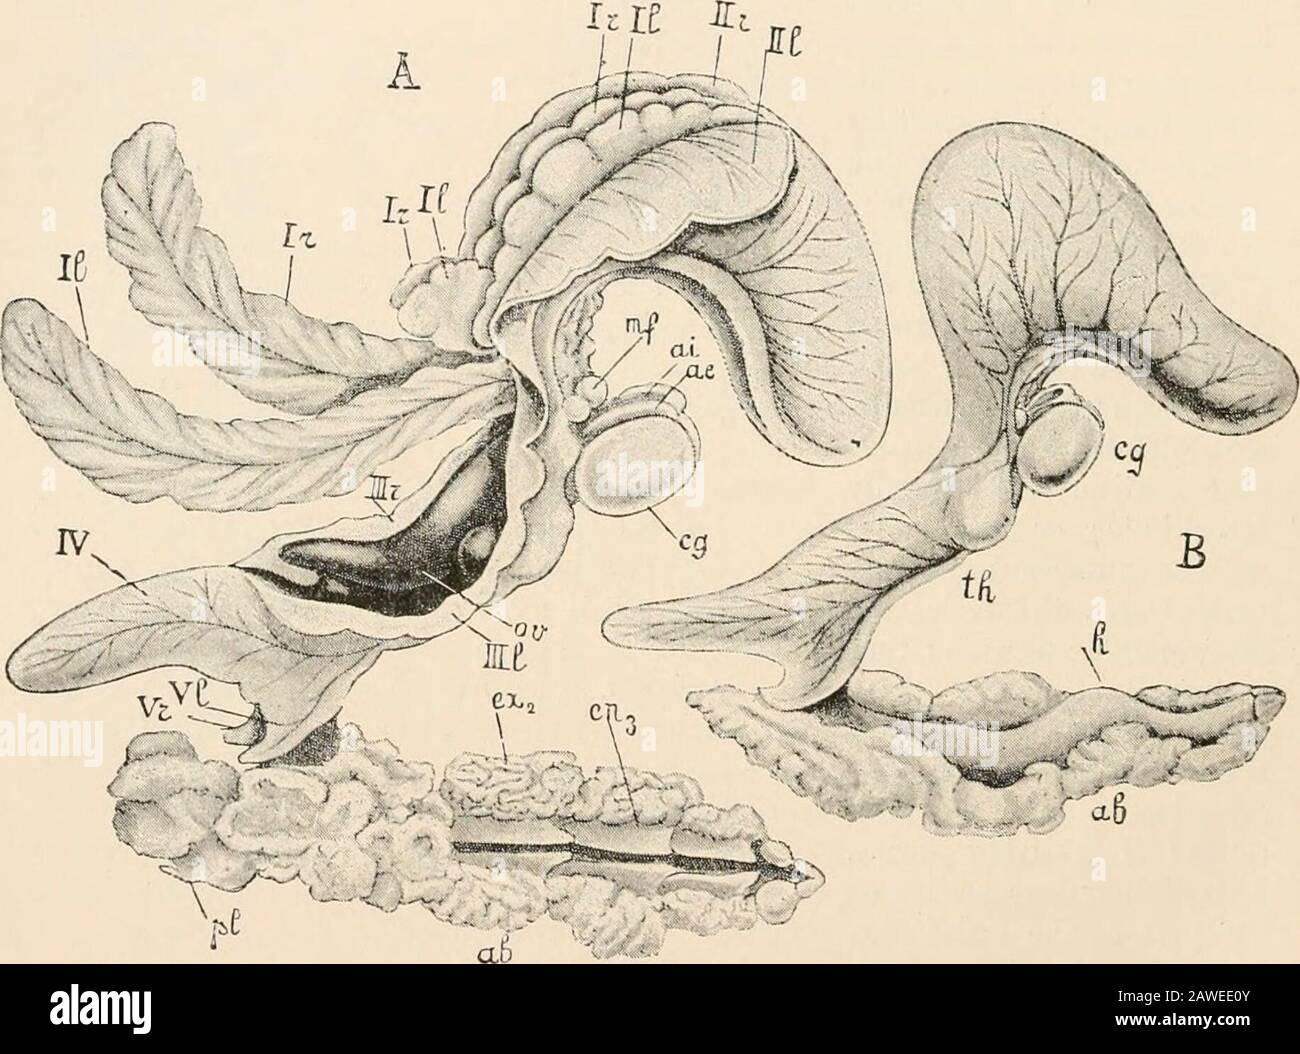 Text-book of comparative anatomy . .VJiV--. Fio. 253.—Portunion Meenadis. Adult mature female (after Giard and Bonnier). A, With thebrood cavity partly opened in the ventral median line and the brood lamellae separated. The abdomen (alt) is so placed that the ventral side is seen. 7c, The anterior middle and posterior lobesof the first brood lamella on the right side ; II, the same of the first brood lamella on the left; // rand III, 2d brood lamellae (right and left): Illr and III I, 3d brood lamellte (right and left) ; IV, 4thbrood lamella;; Vr and VI, 5th brood lamellas (right and left); pi Stock Photo